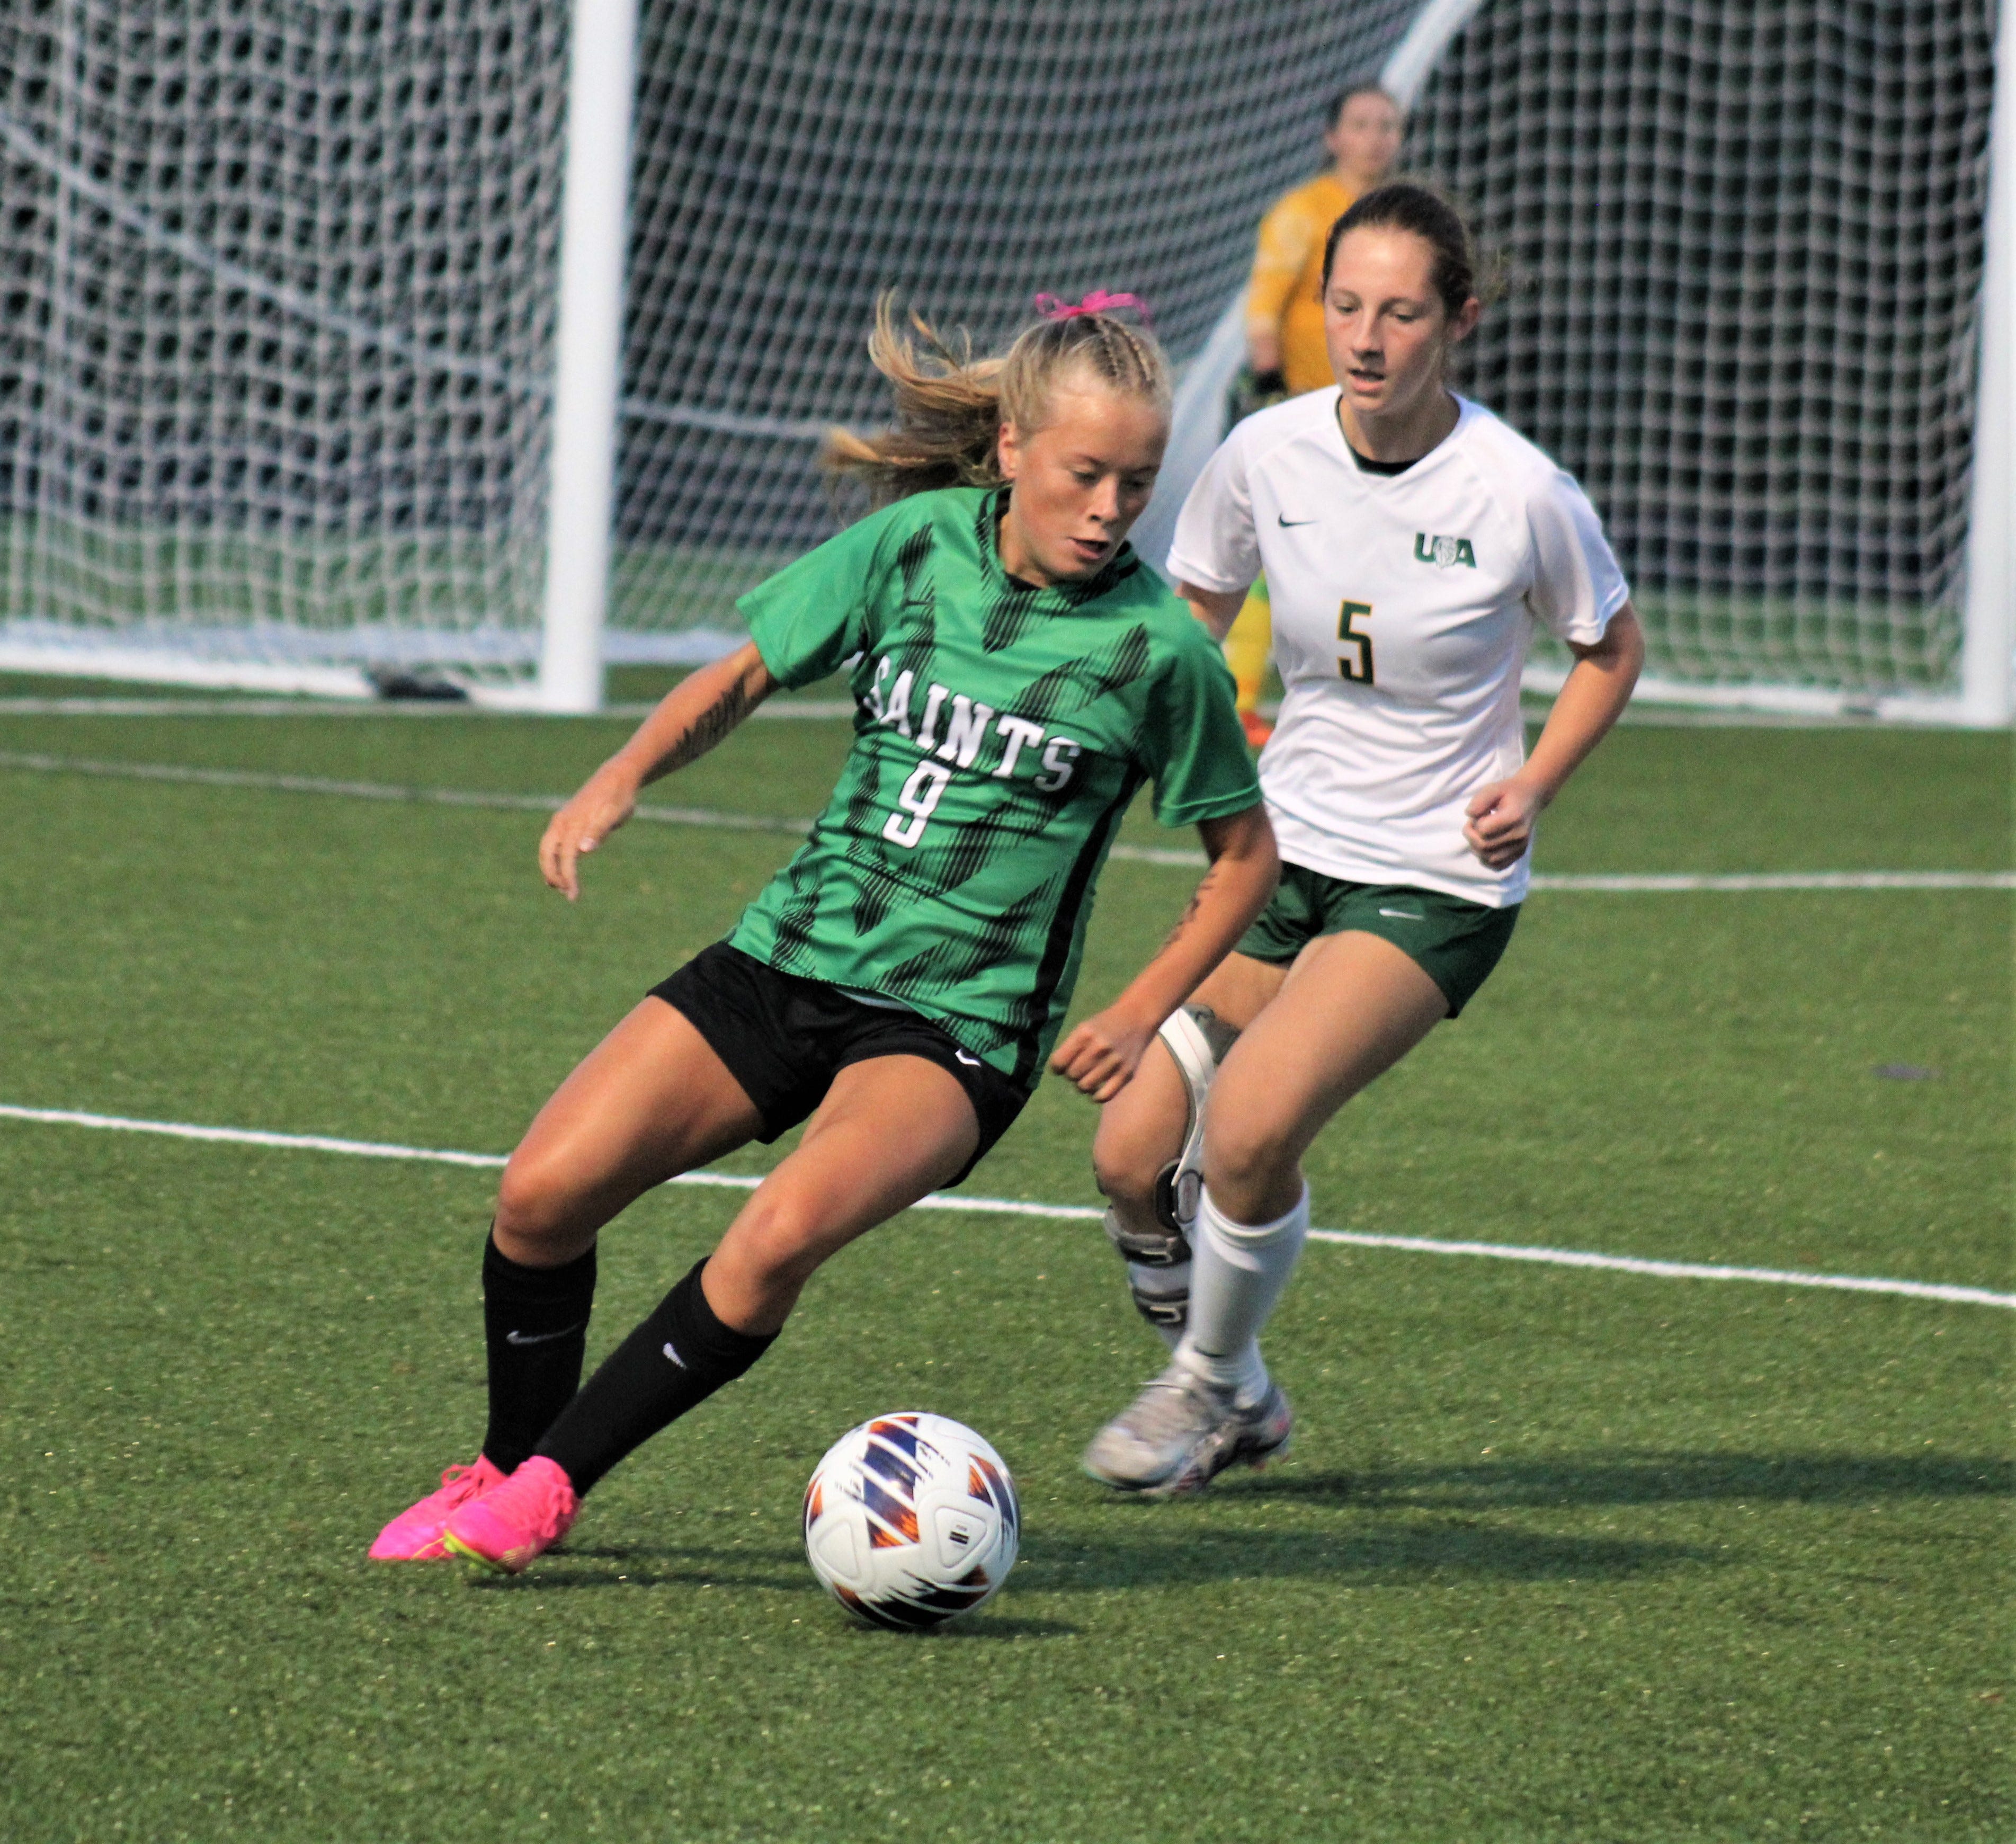 ‘We have to stay tough:’ Seton soccer starts state title defense with 3 shutouts